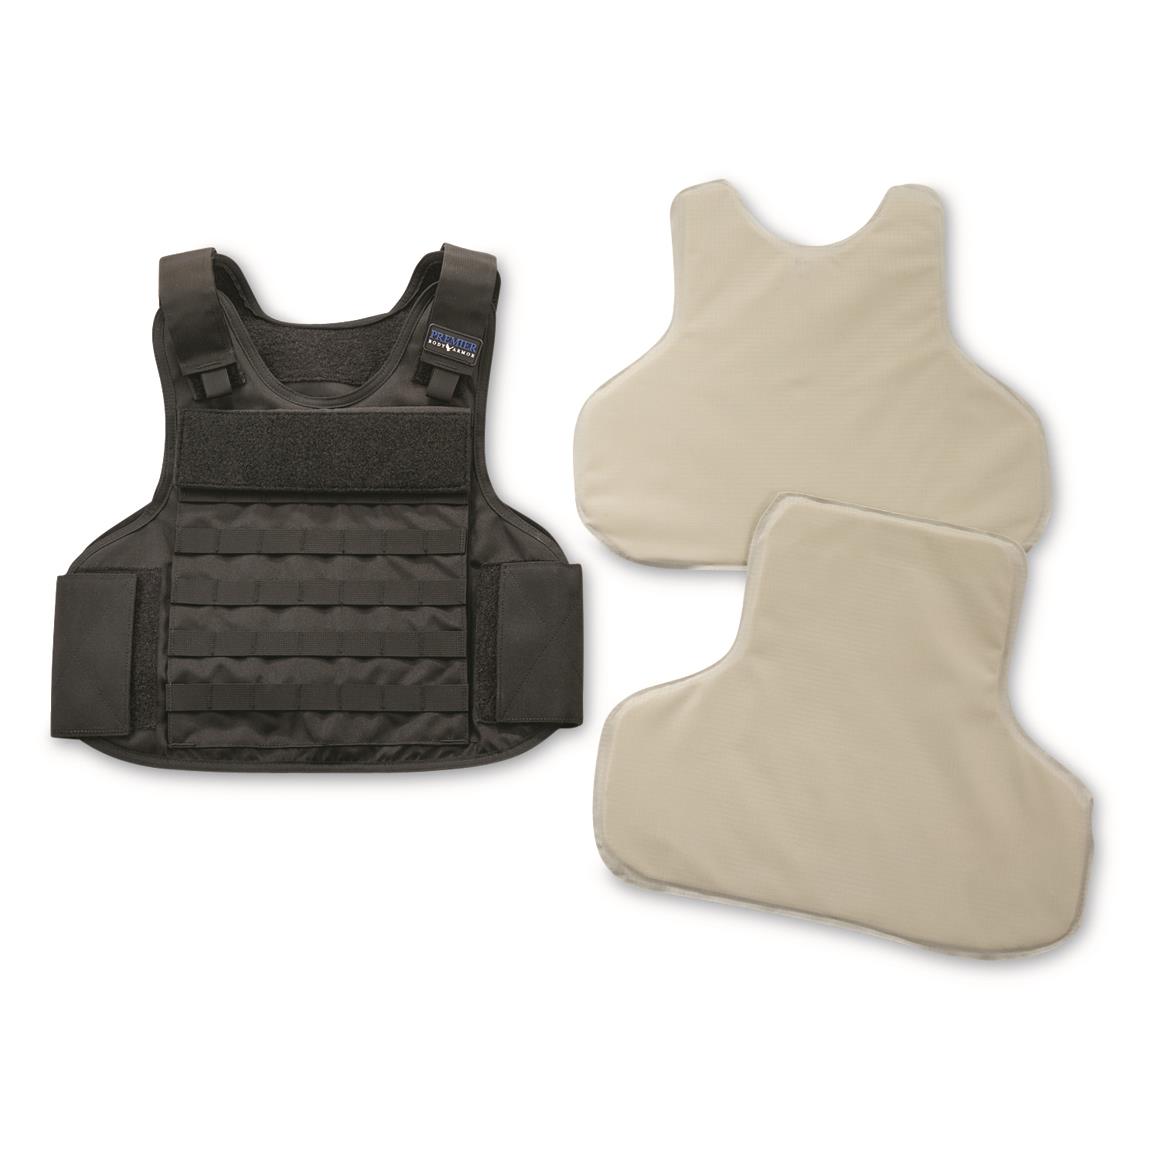 Includes (2) Level IIIA 10" x 12" soft armor panels: one in the front and one in the back, Black